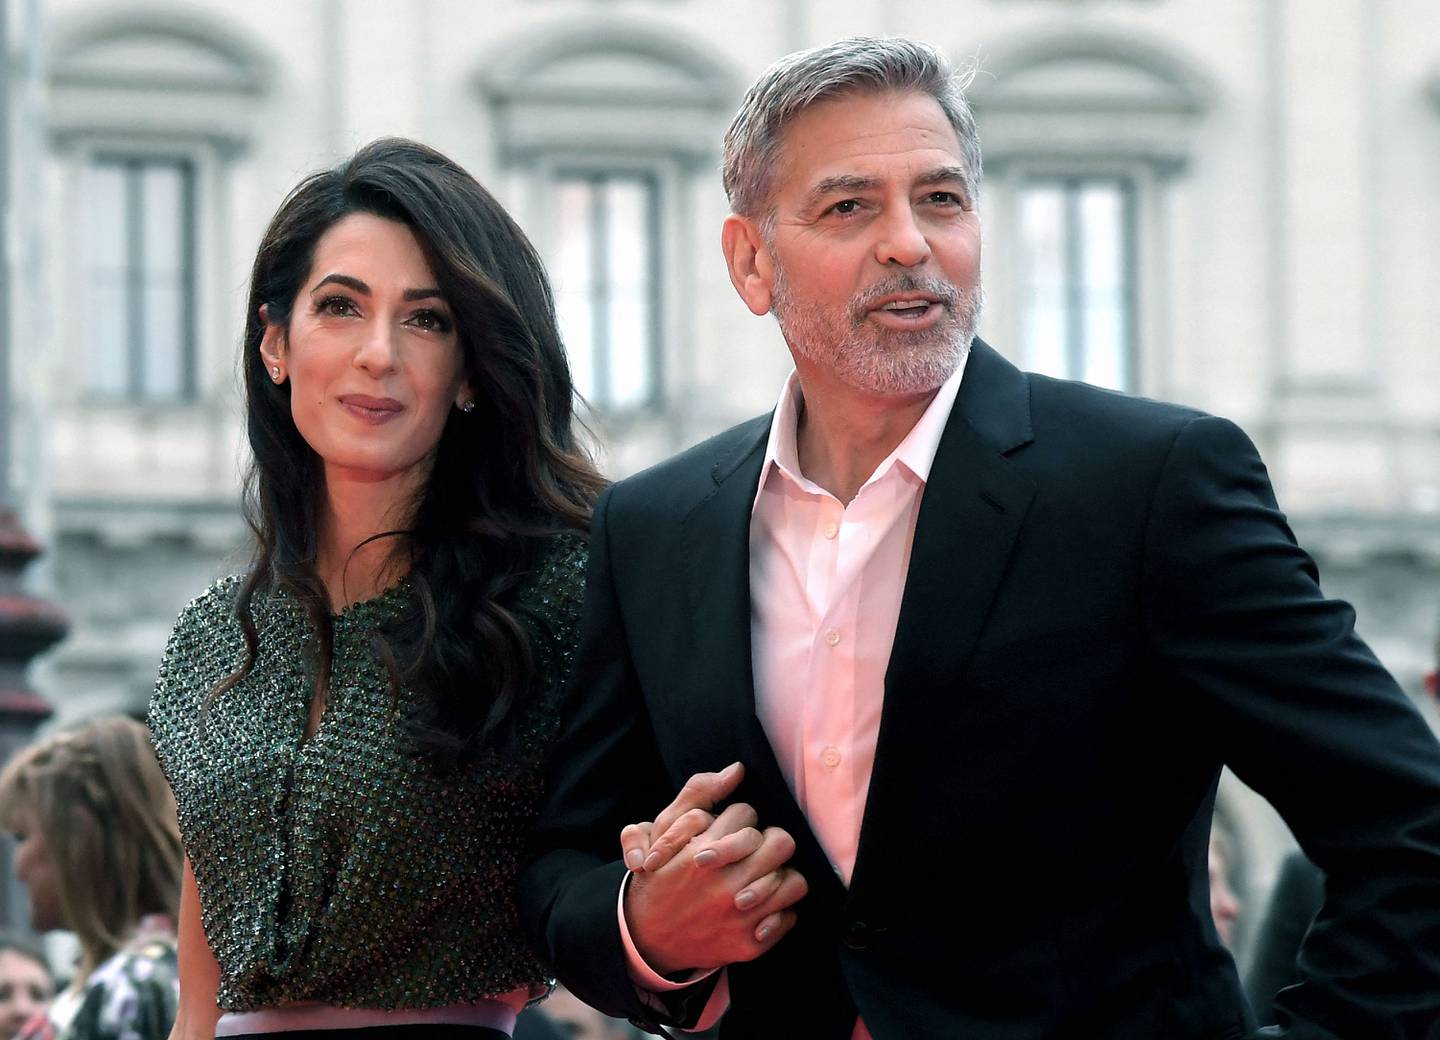 George Clooney, 60, says discussions with his wife Amal Clooney about ageing have led him to re-evaluate the projects he signs up to. AFP